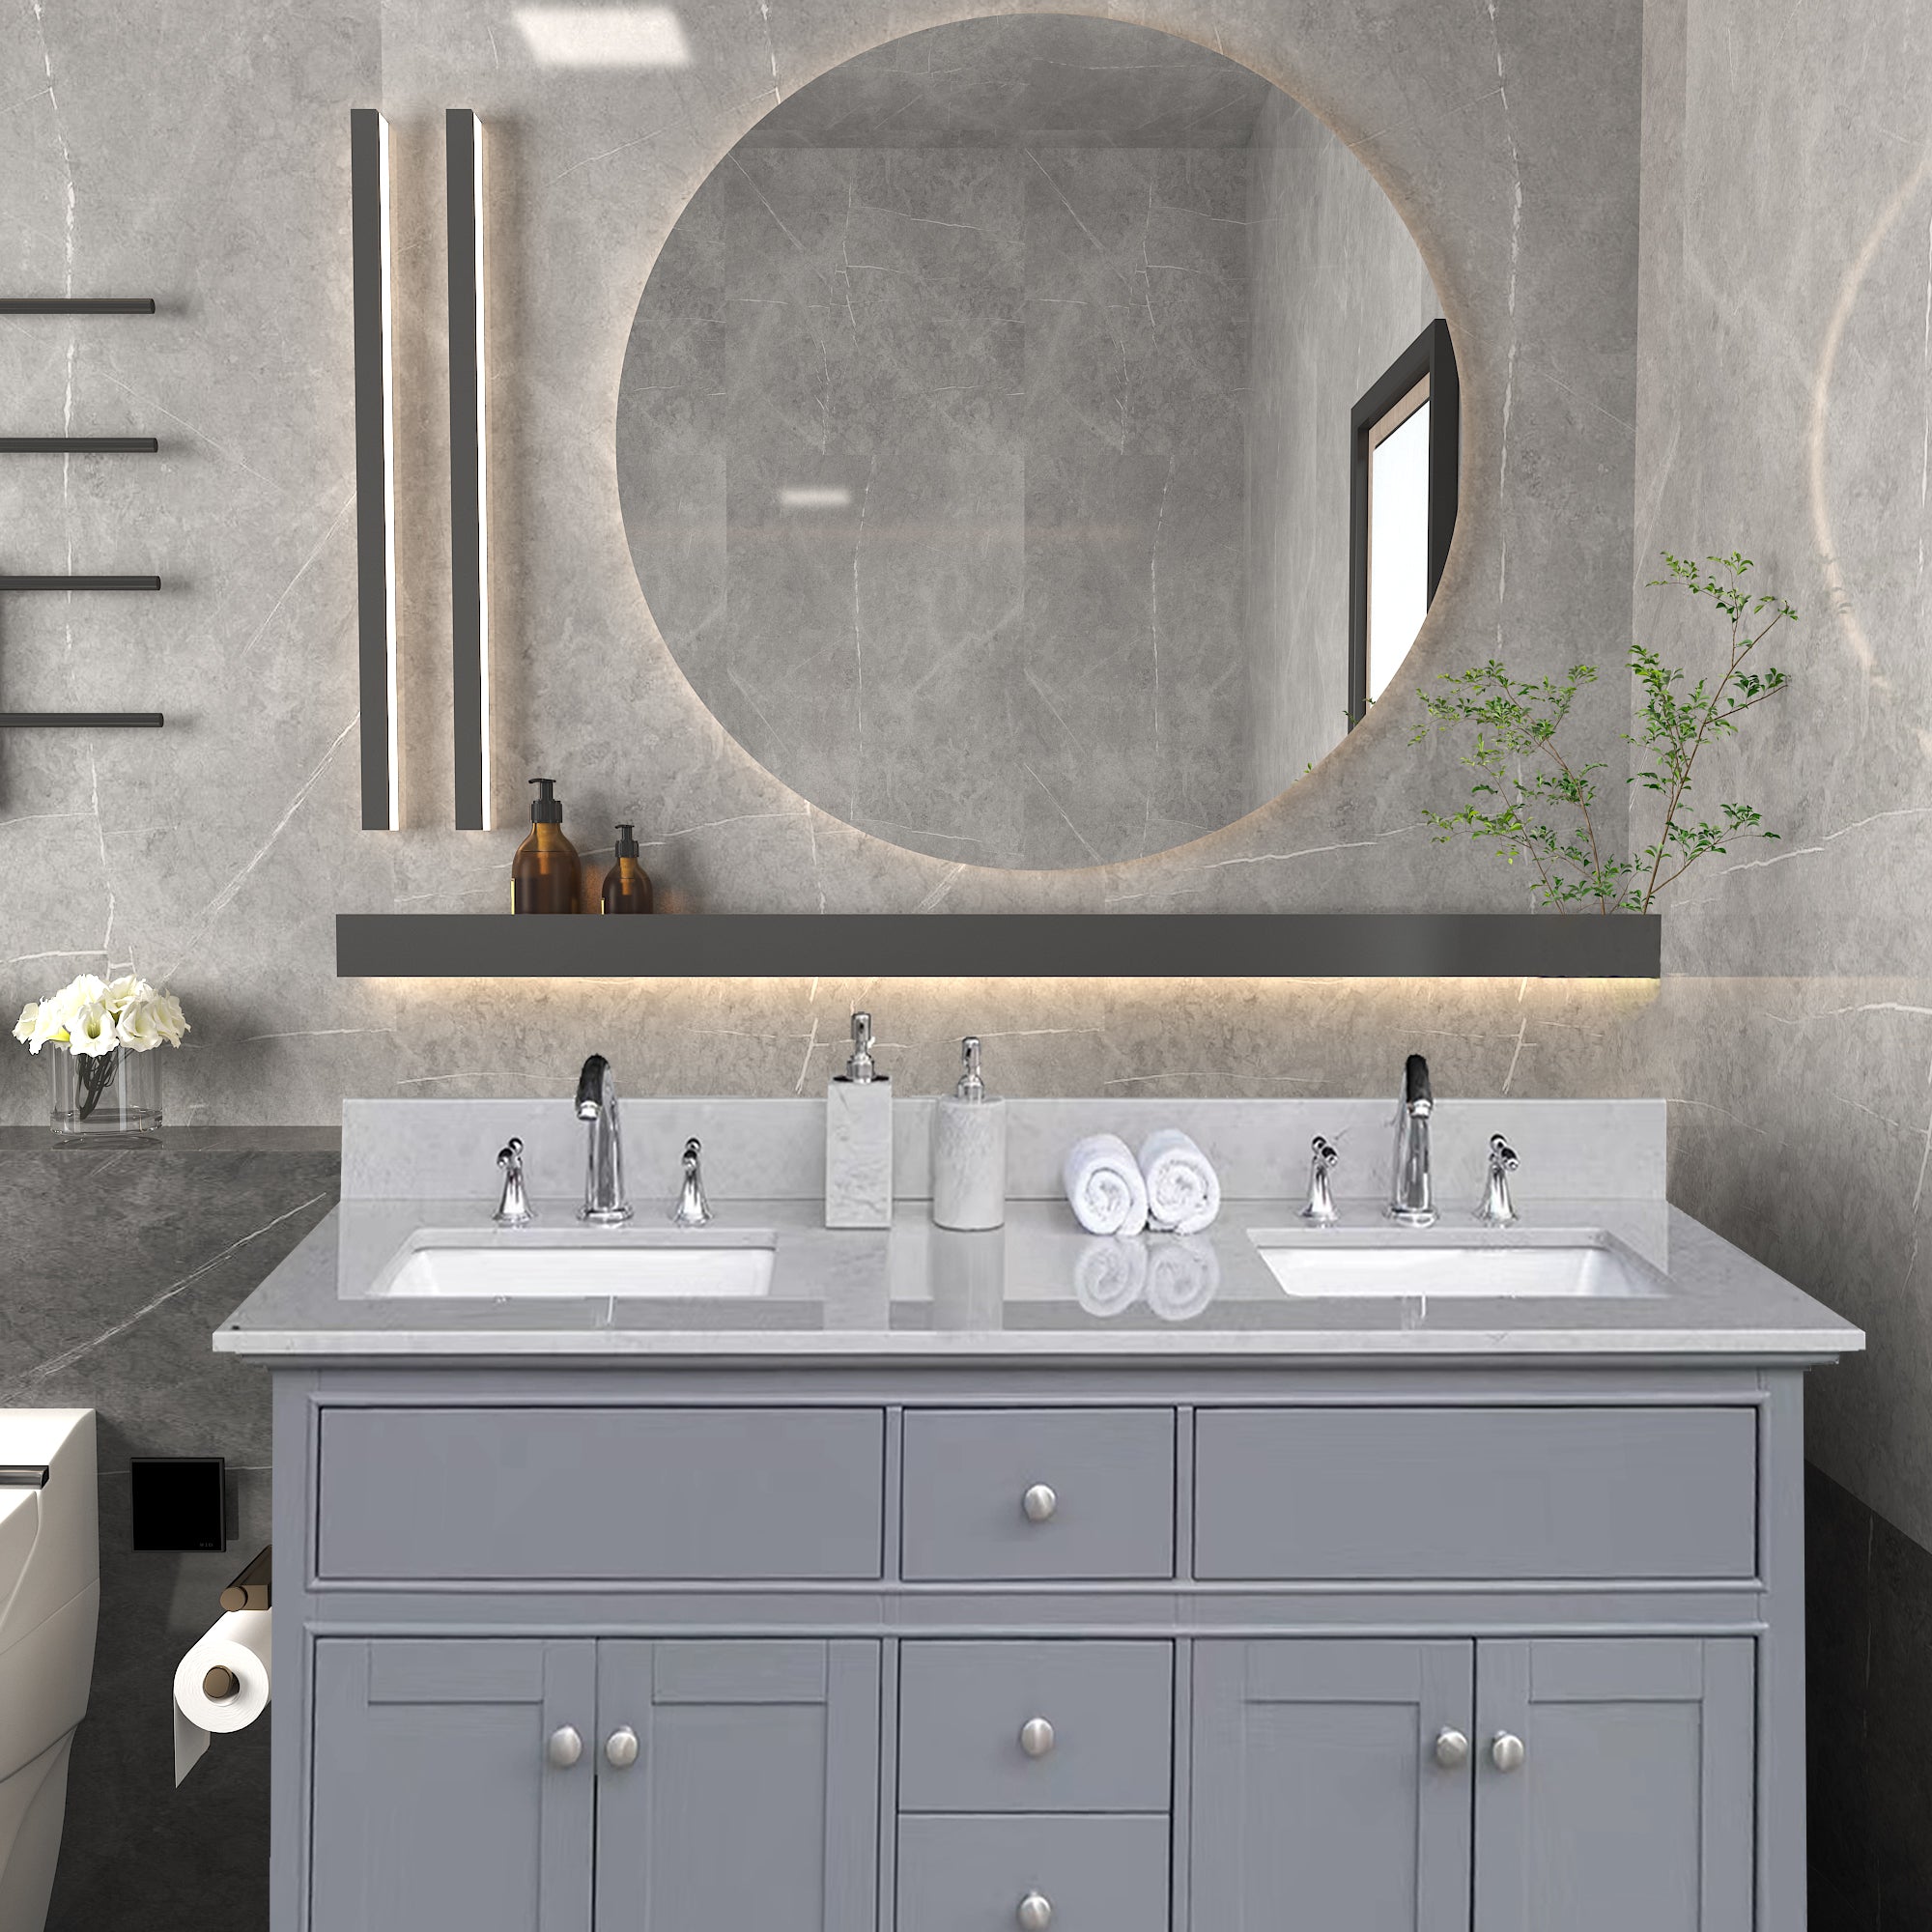 Montary® 61" Bathroom Stone Vanity Top Calacatta Gray Engineered Marble Color with Undermount Ceramic Sink and 3 Faucet Hole with Backsplash